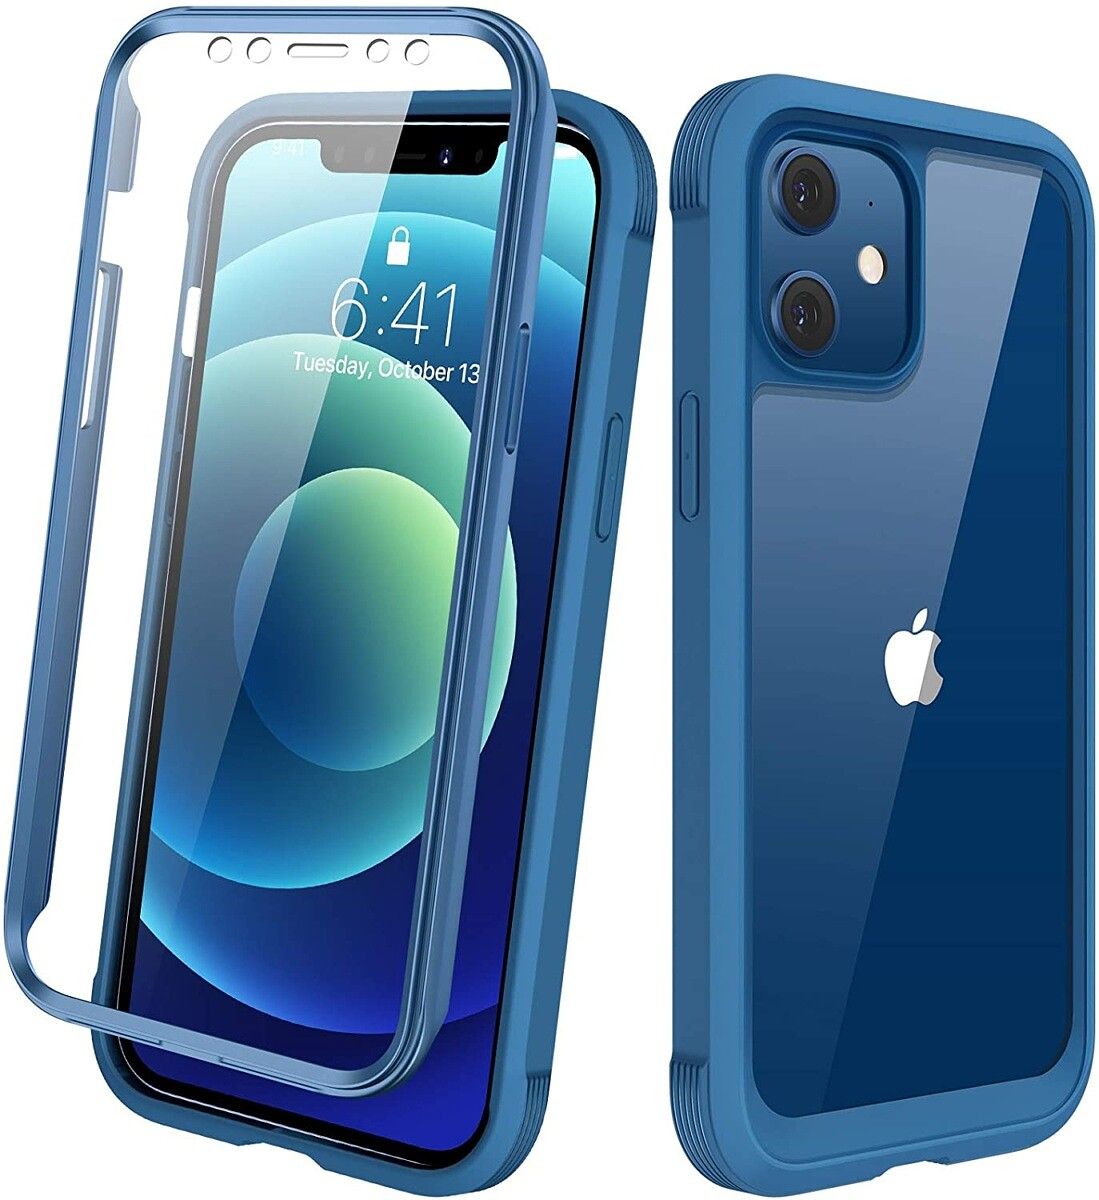 Instead of buying a separate screen protector, Diaclara provides a built-in one which clips onto the case. This case is guaranteed to protect your phone from bumps and scrapes.